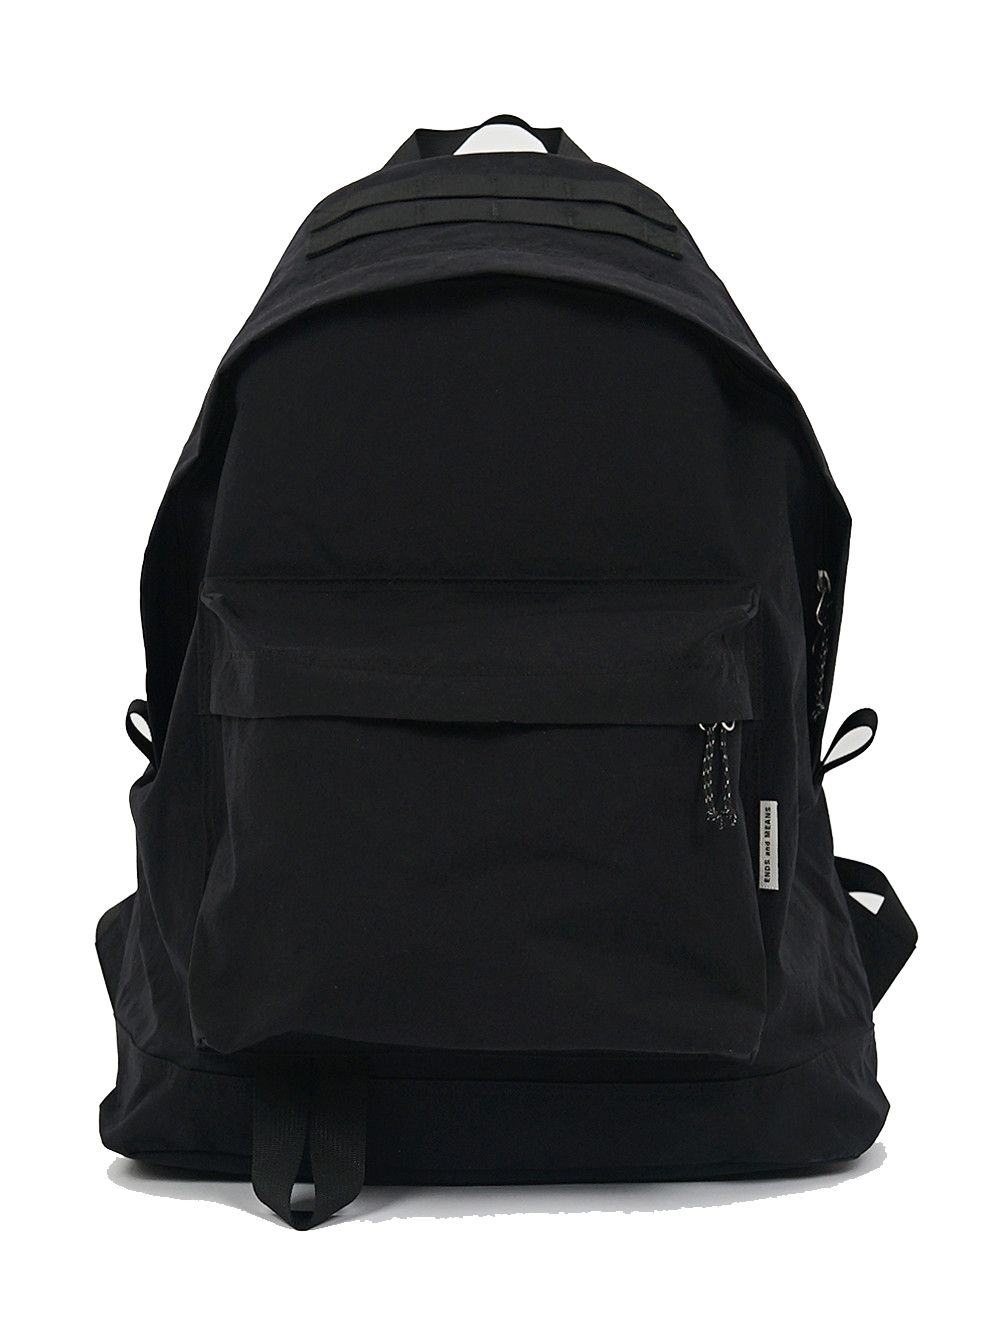 Very Goods   ENDS and MEANS Daytrip Backpack SHD   DOCKLANDS Store